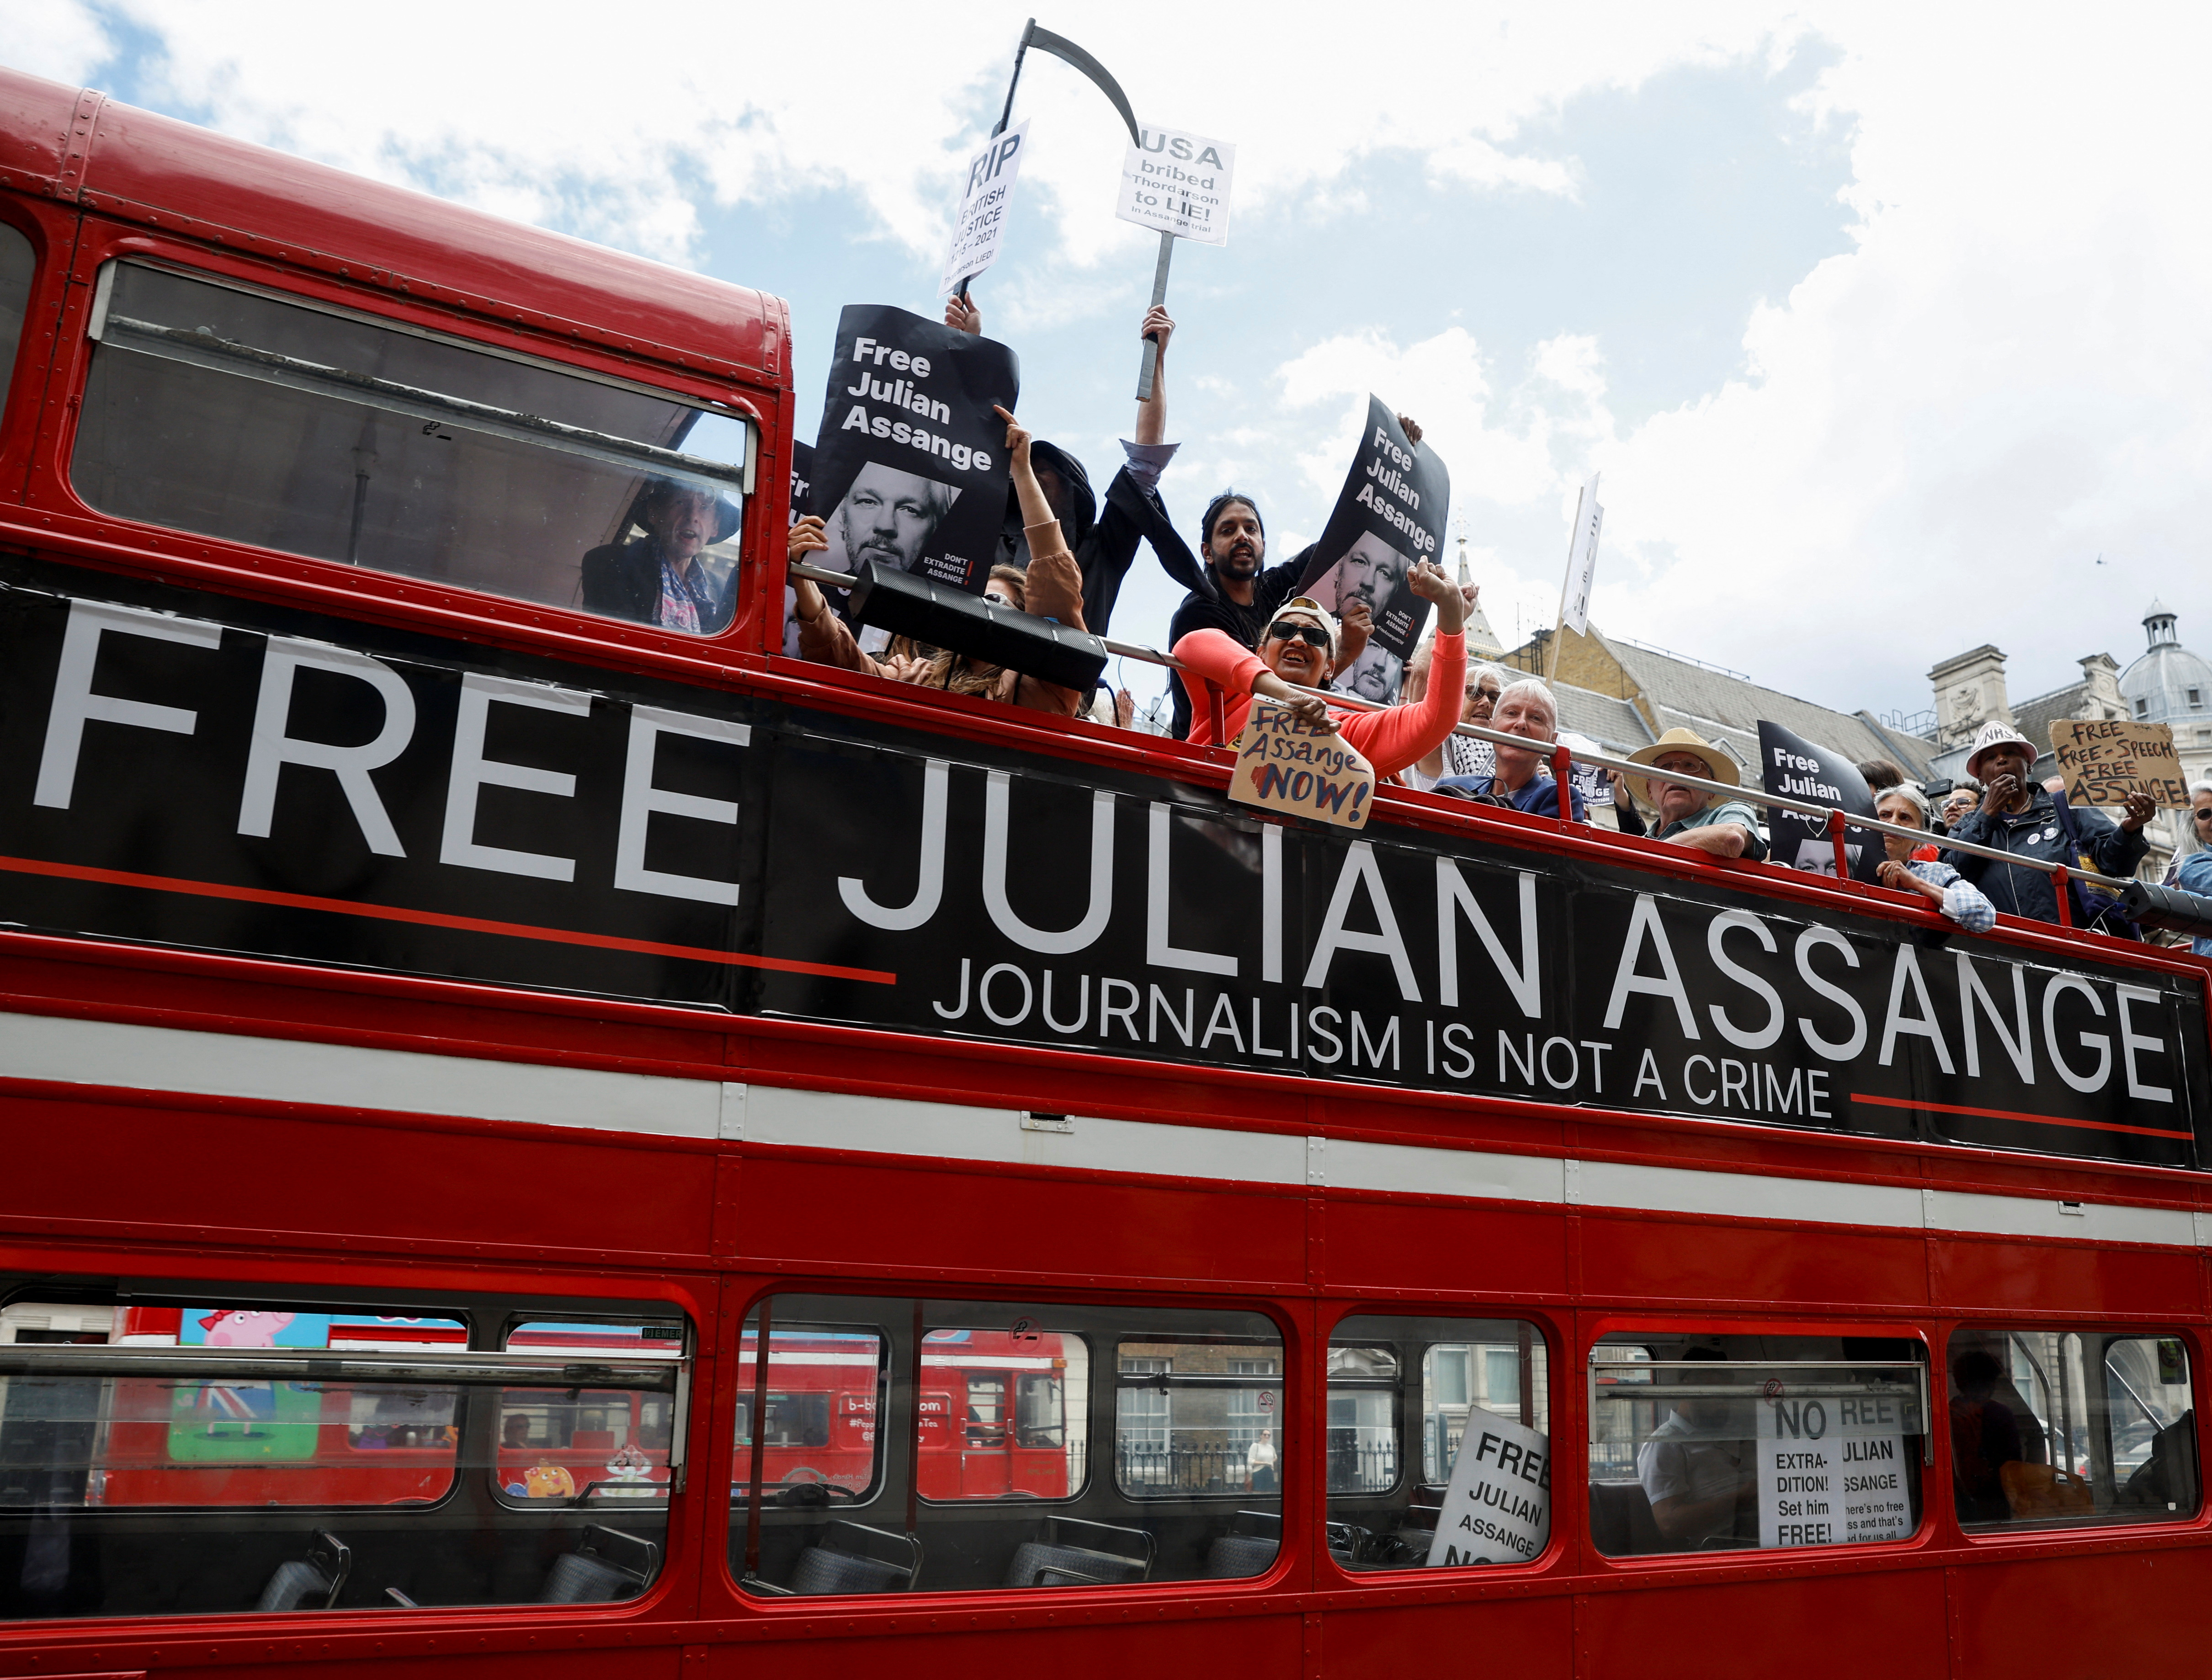 London bus takes Assange protest to the Home Office and Parliament